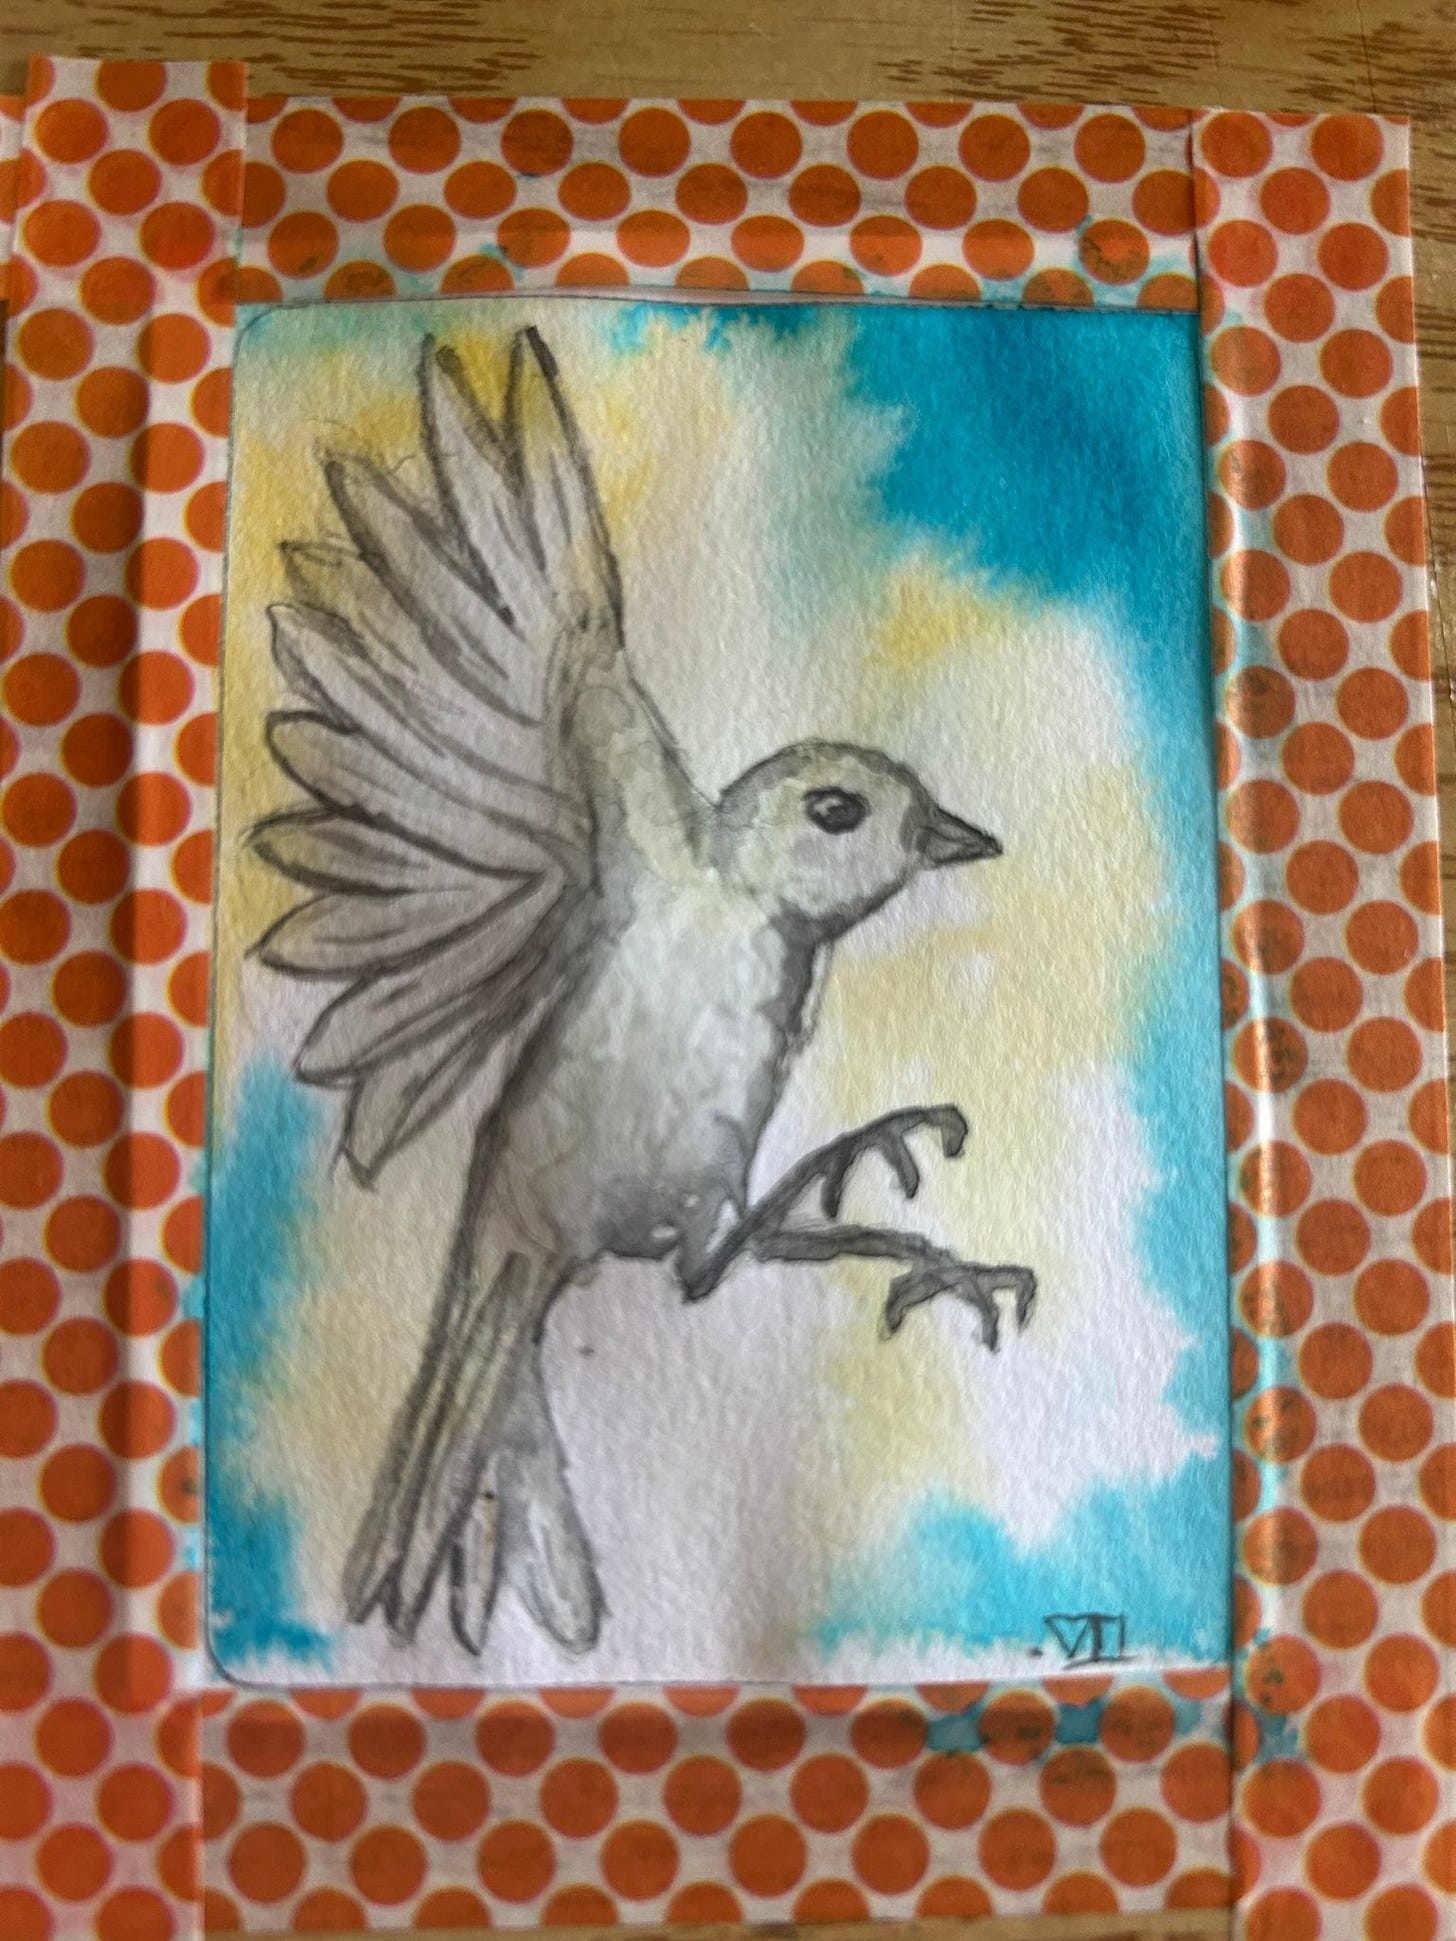 a watercolor picture of a bird in flight